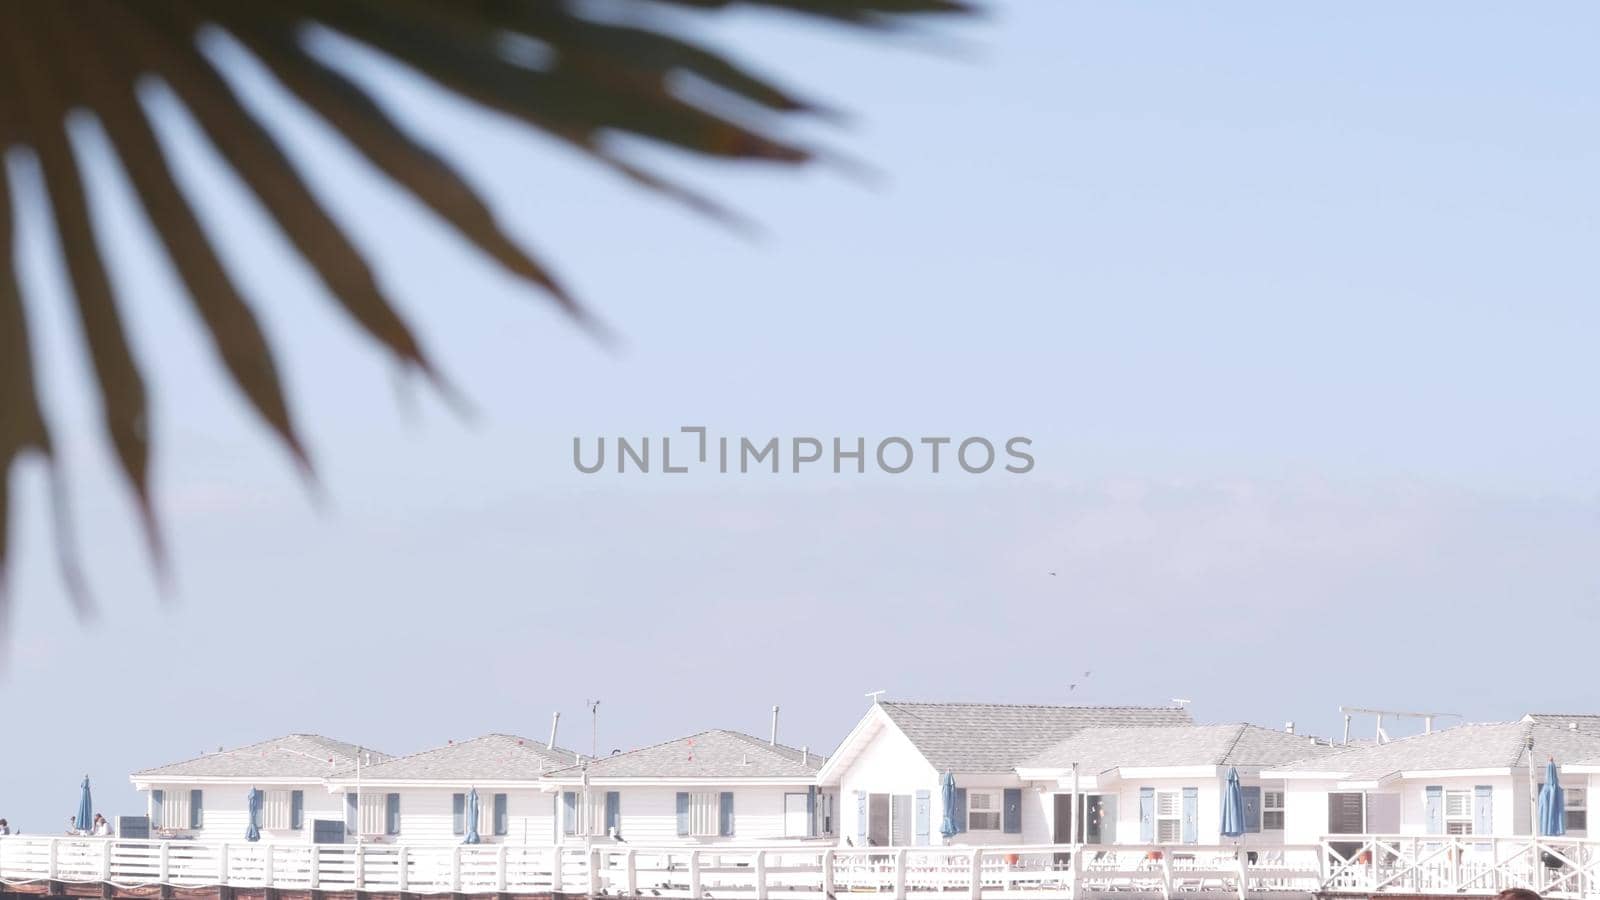 Palm tree and wooden Crystal pier with cottages, California ocean beach, USA. by DogoraSun